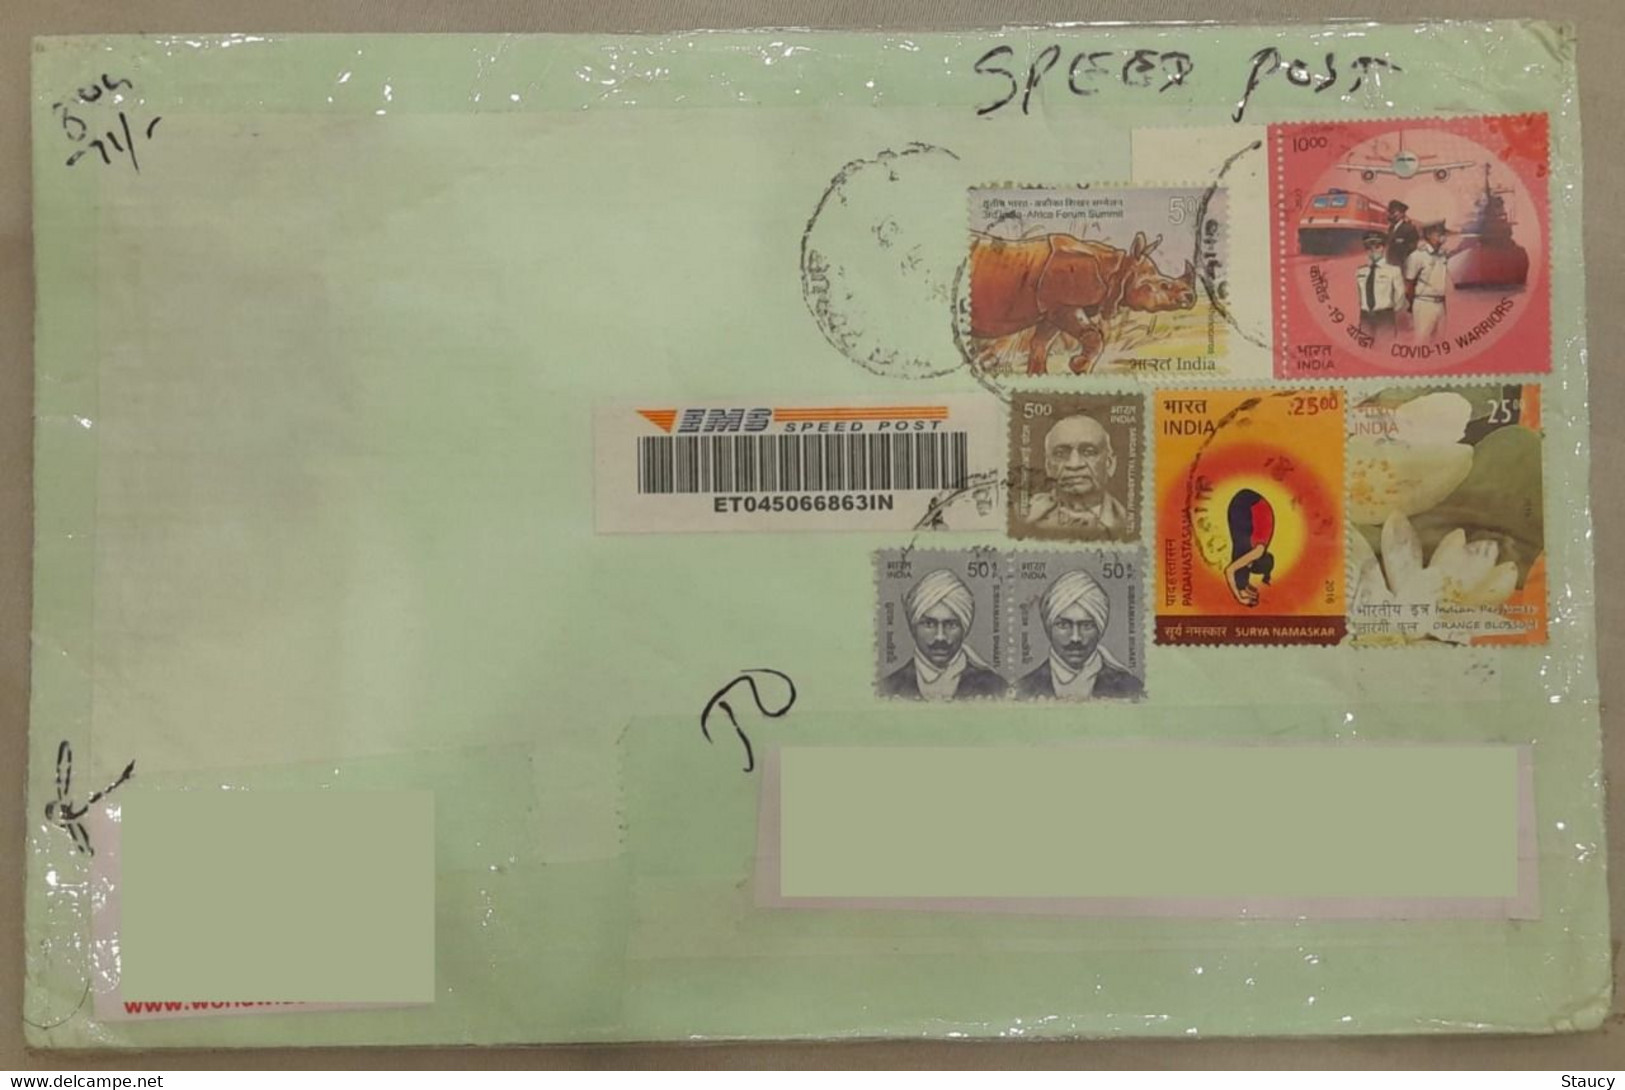 INDIA 2020 Salute To Pandemic / Covid-19 Warriors Stamp Franking On Registered Speed Post Cover As Per Scan - Drogue